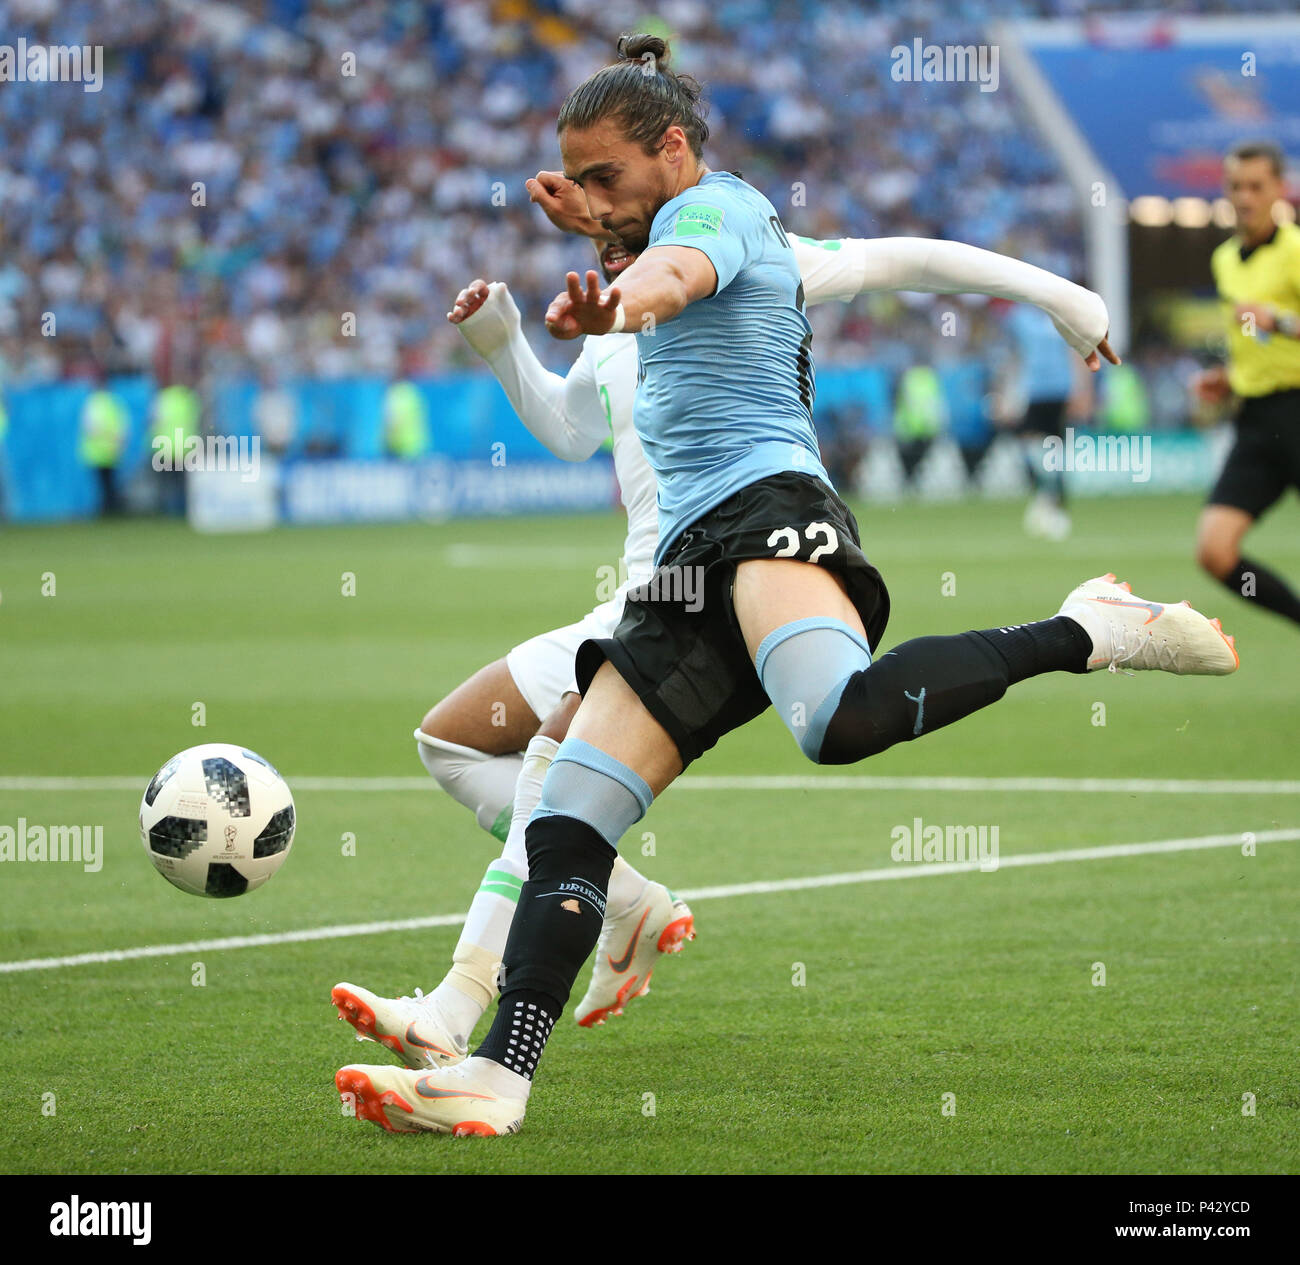 Rostov, Russia. 20 June 2018. Martin Caceres of Uruguay competes during a Group A match between Uruguay and Saudi Arabia at the 2018 FIFA World Cup in Rostov-on-Don, Russia, June 20, 2018. Credit: Li Ming/Xinhua/Alamy Live News Stock Photo